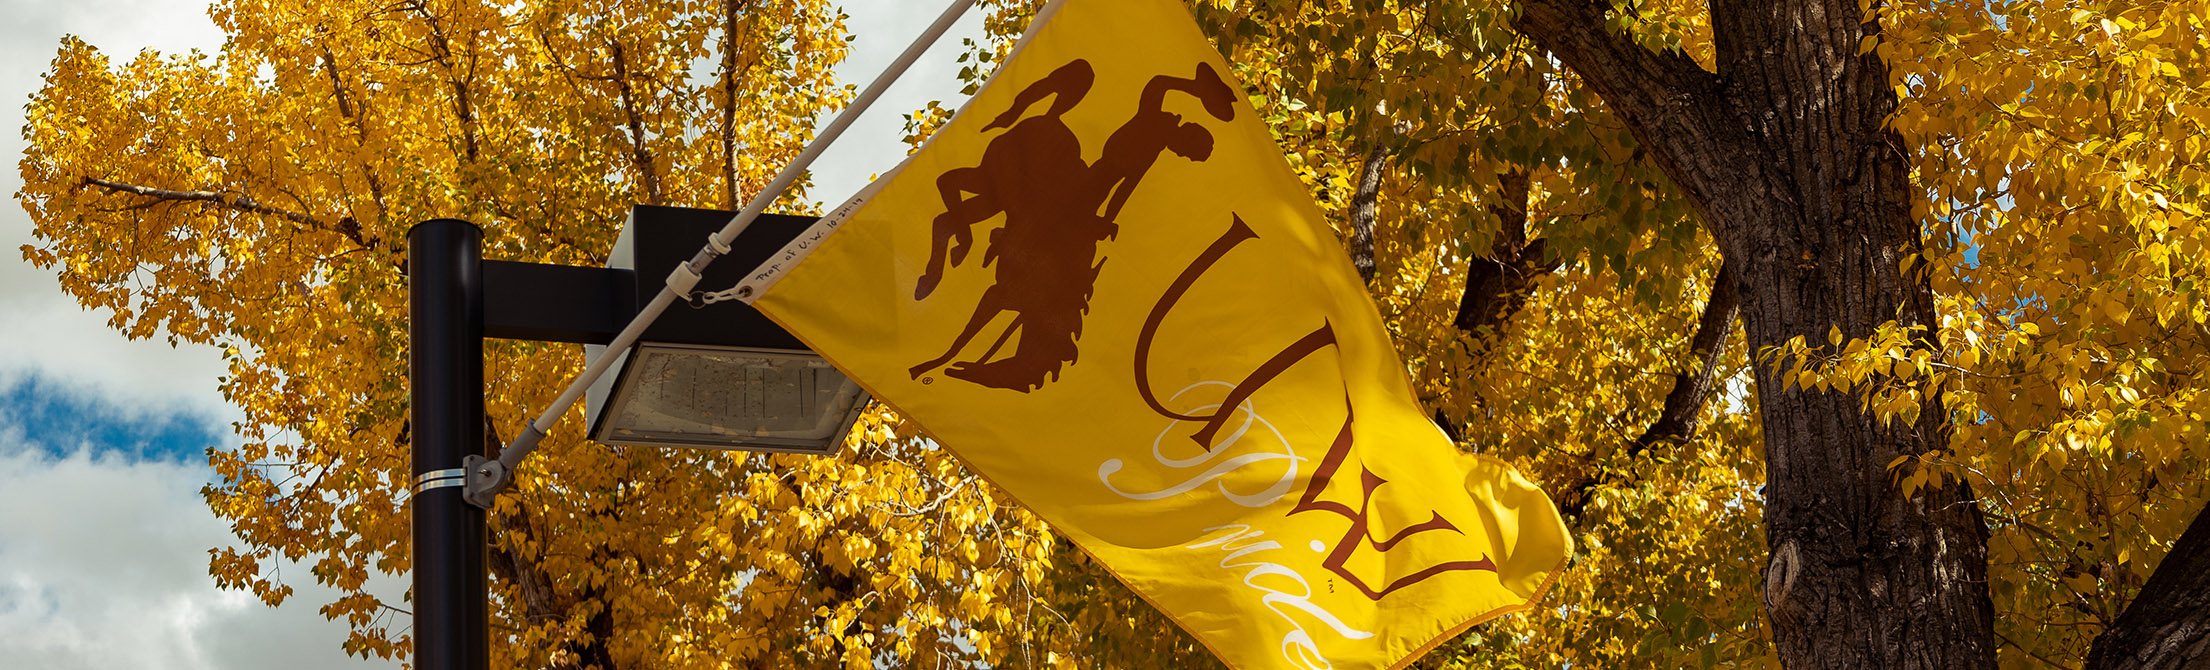 Steamboat logo on flag flying in front of College of Business Building